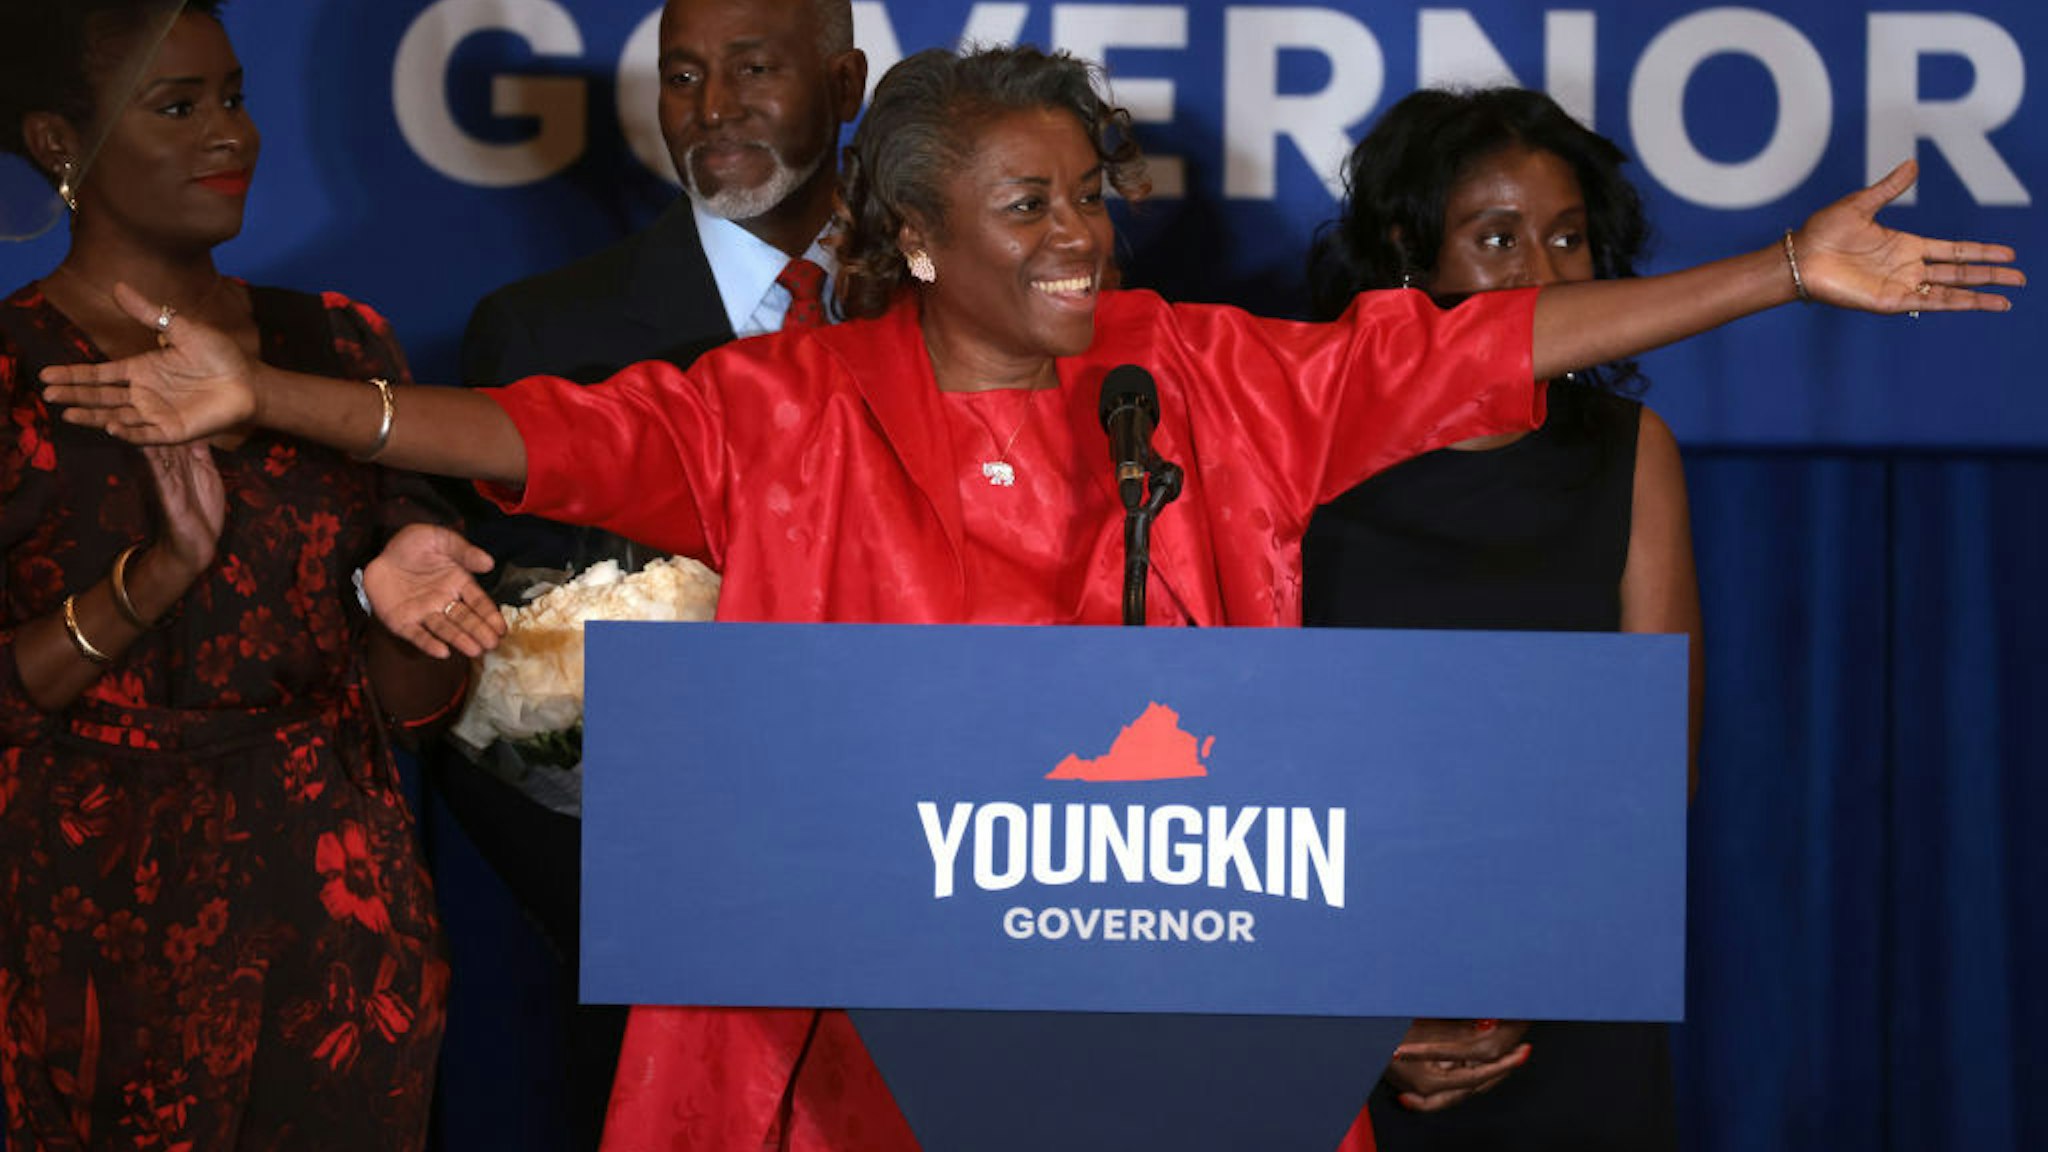 CHANTILLY, VIRGINIA - NOVEMBER 02: Virginia Republican candidate for lieutenant governor Winsome Sears takes the stage with her family during an election night rally at the Westfields Marriott Washington Dulles on November 02, 2021 in Chantilly, Virginia. Virginians went to the polls Tuesday to vote in the gubernatorial race that pitted Republican gubernatorial candidate Glenn Youngkin against Democratic gubernatorial candidate, former Virginia Gov. Terry McAuliffe. (Photo by Chip Somodevilla/Getty Images)